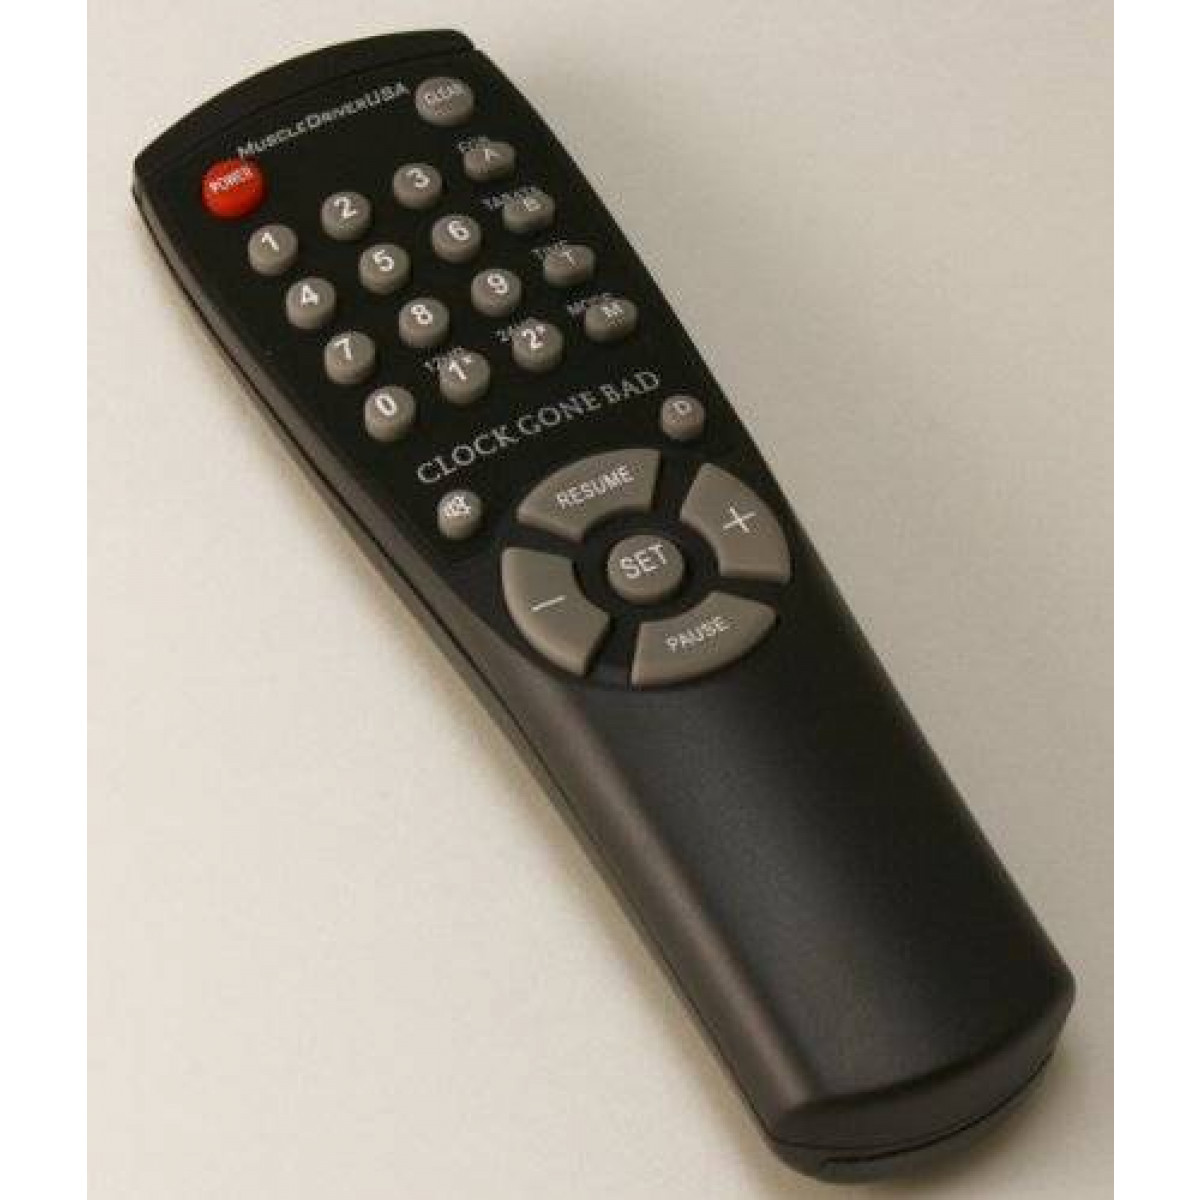 FringeSport Remote Control for Clock Gone Bad Timer L Replace Lost or Broken Remote L 1 Year Warranty for All Manufacturer Defects